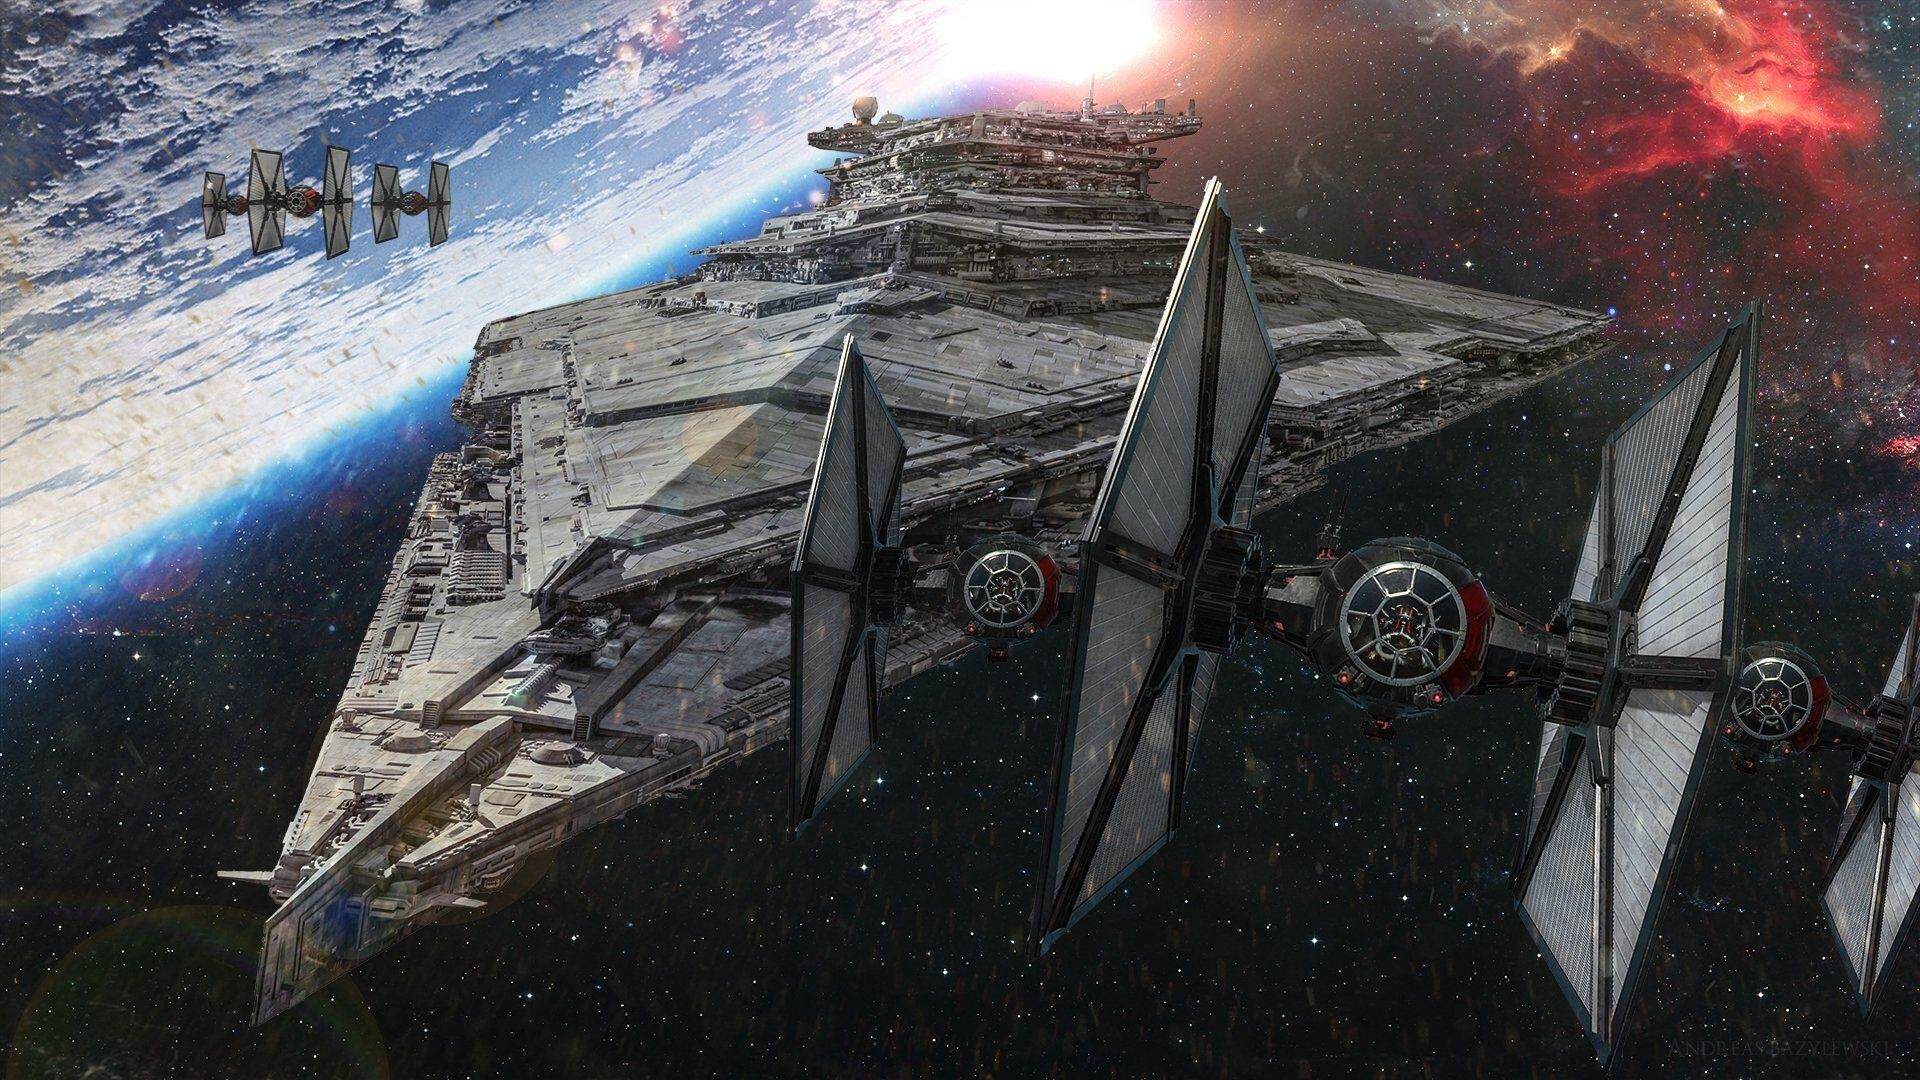 Star Wars: Venator-class Star Destroyer, A versatile capital ship capable of serving as both a combatant in ship-to-ship naval warfare and a starfighter carrier. 1920x1080 Full HD Wallpaper.